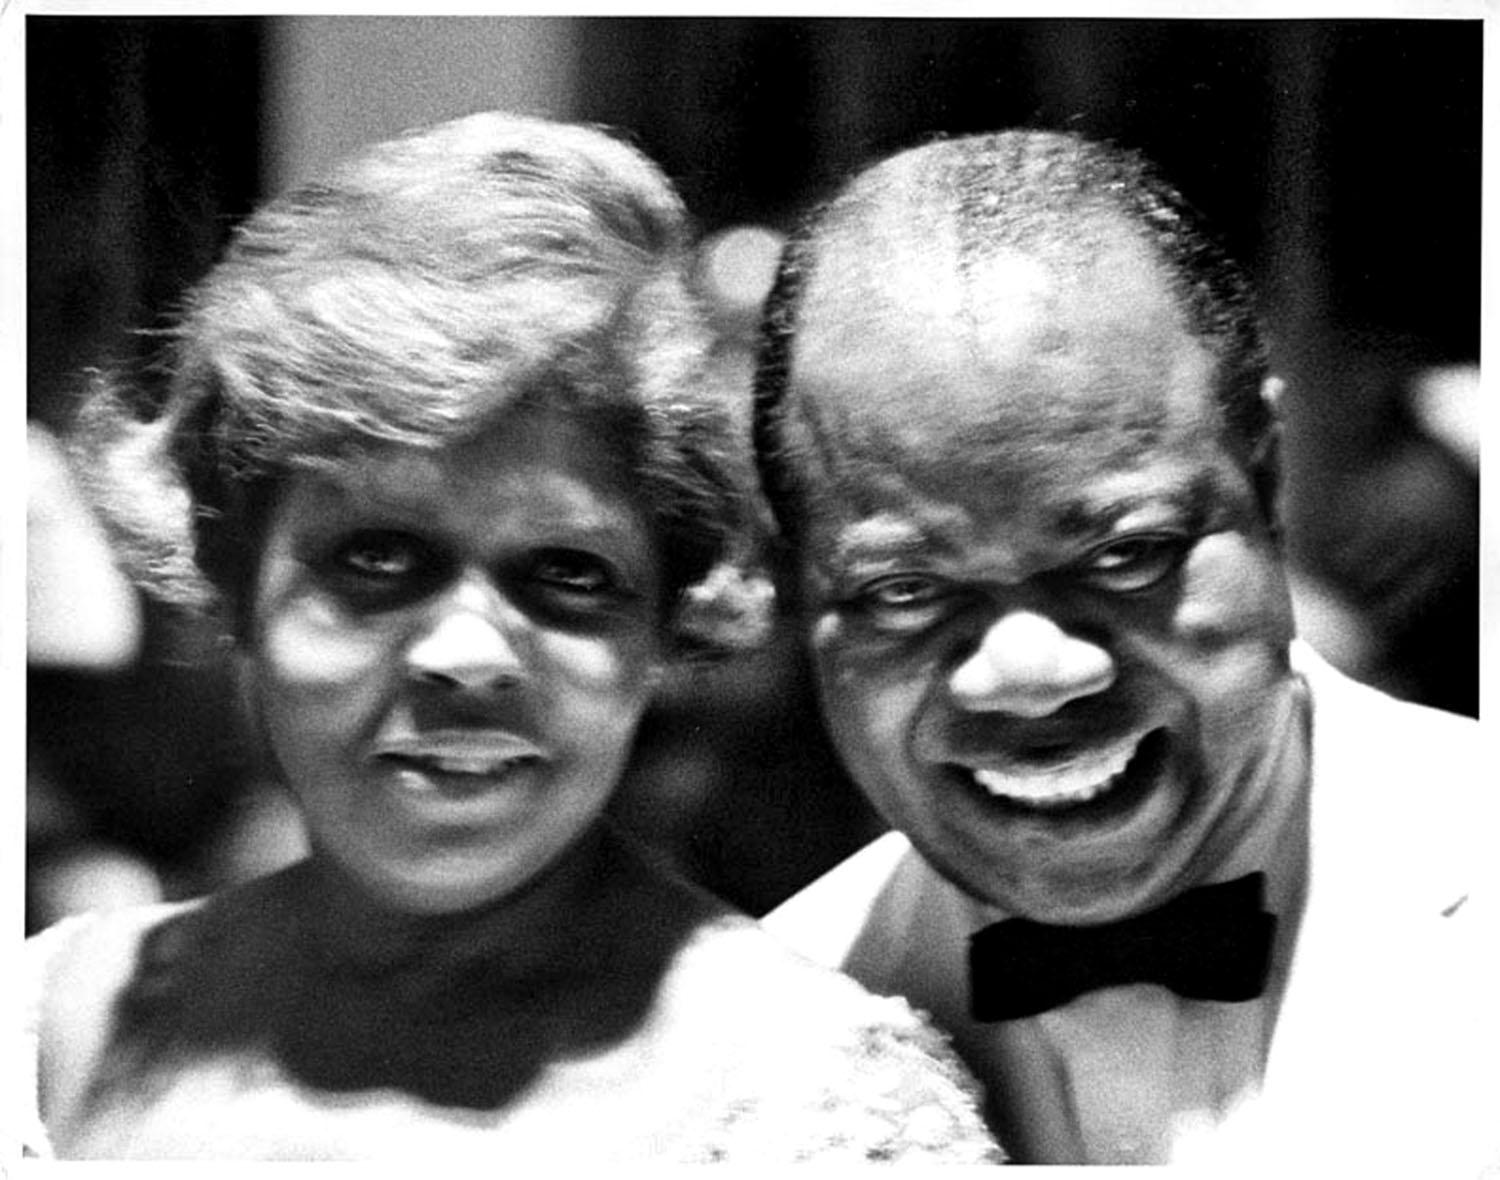 Jack Mitchell Black and White Photograph - American trumpeter, composer and vocalist Louis Armstrong with his wife Lucille